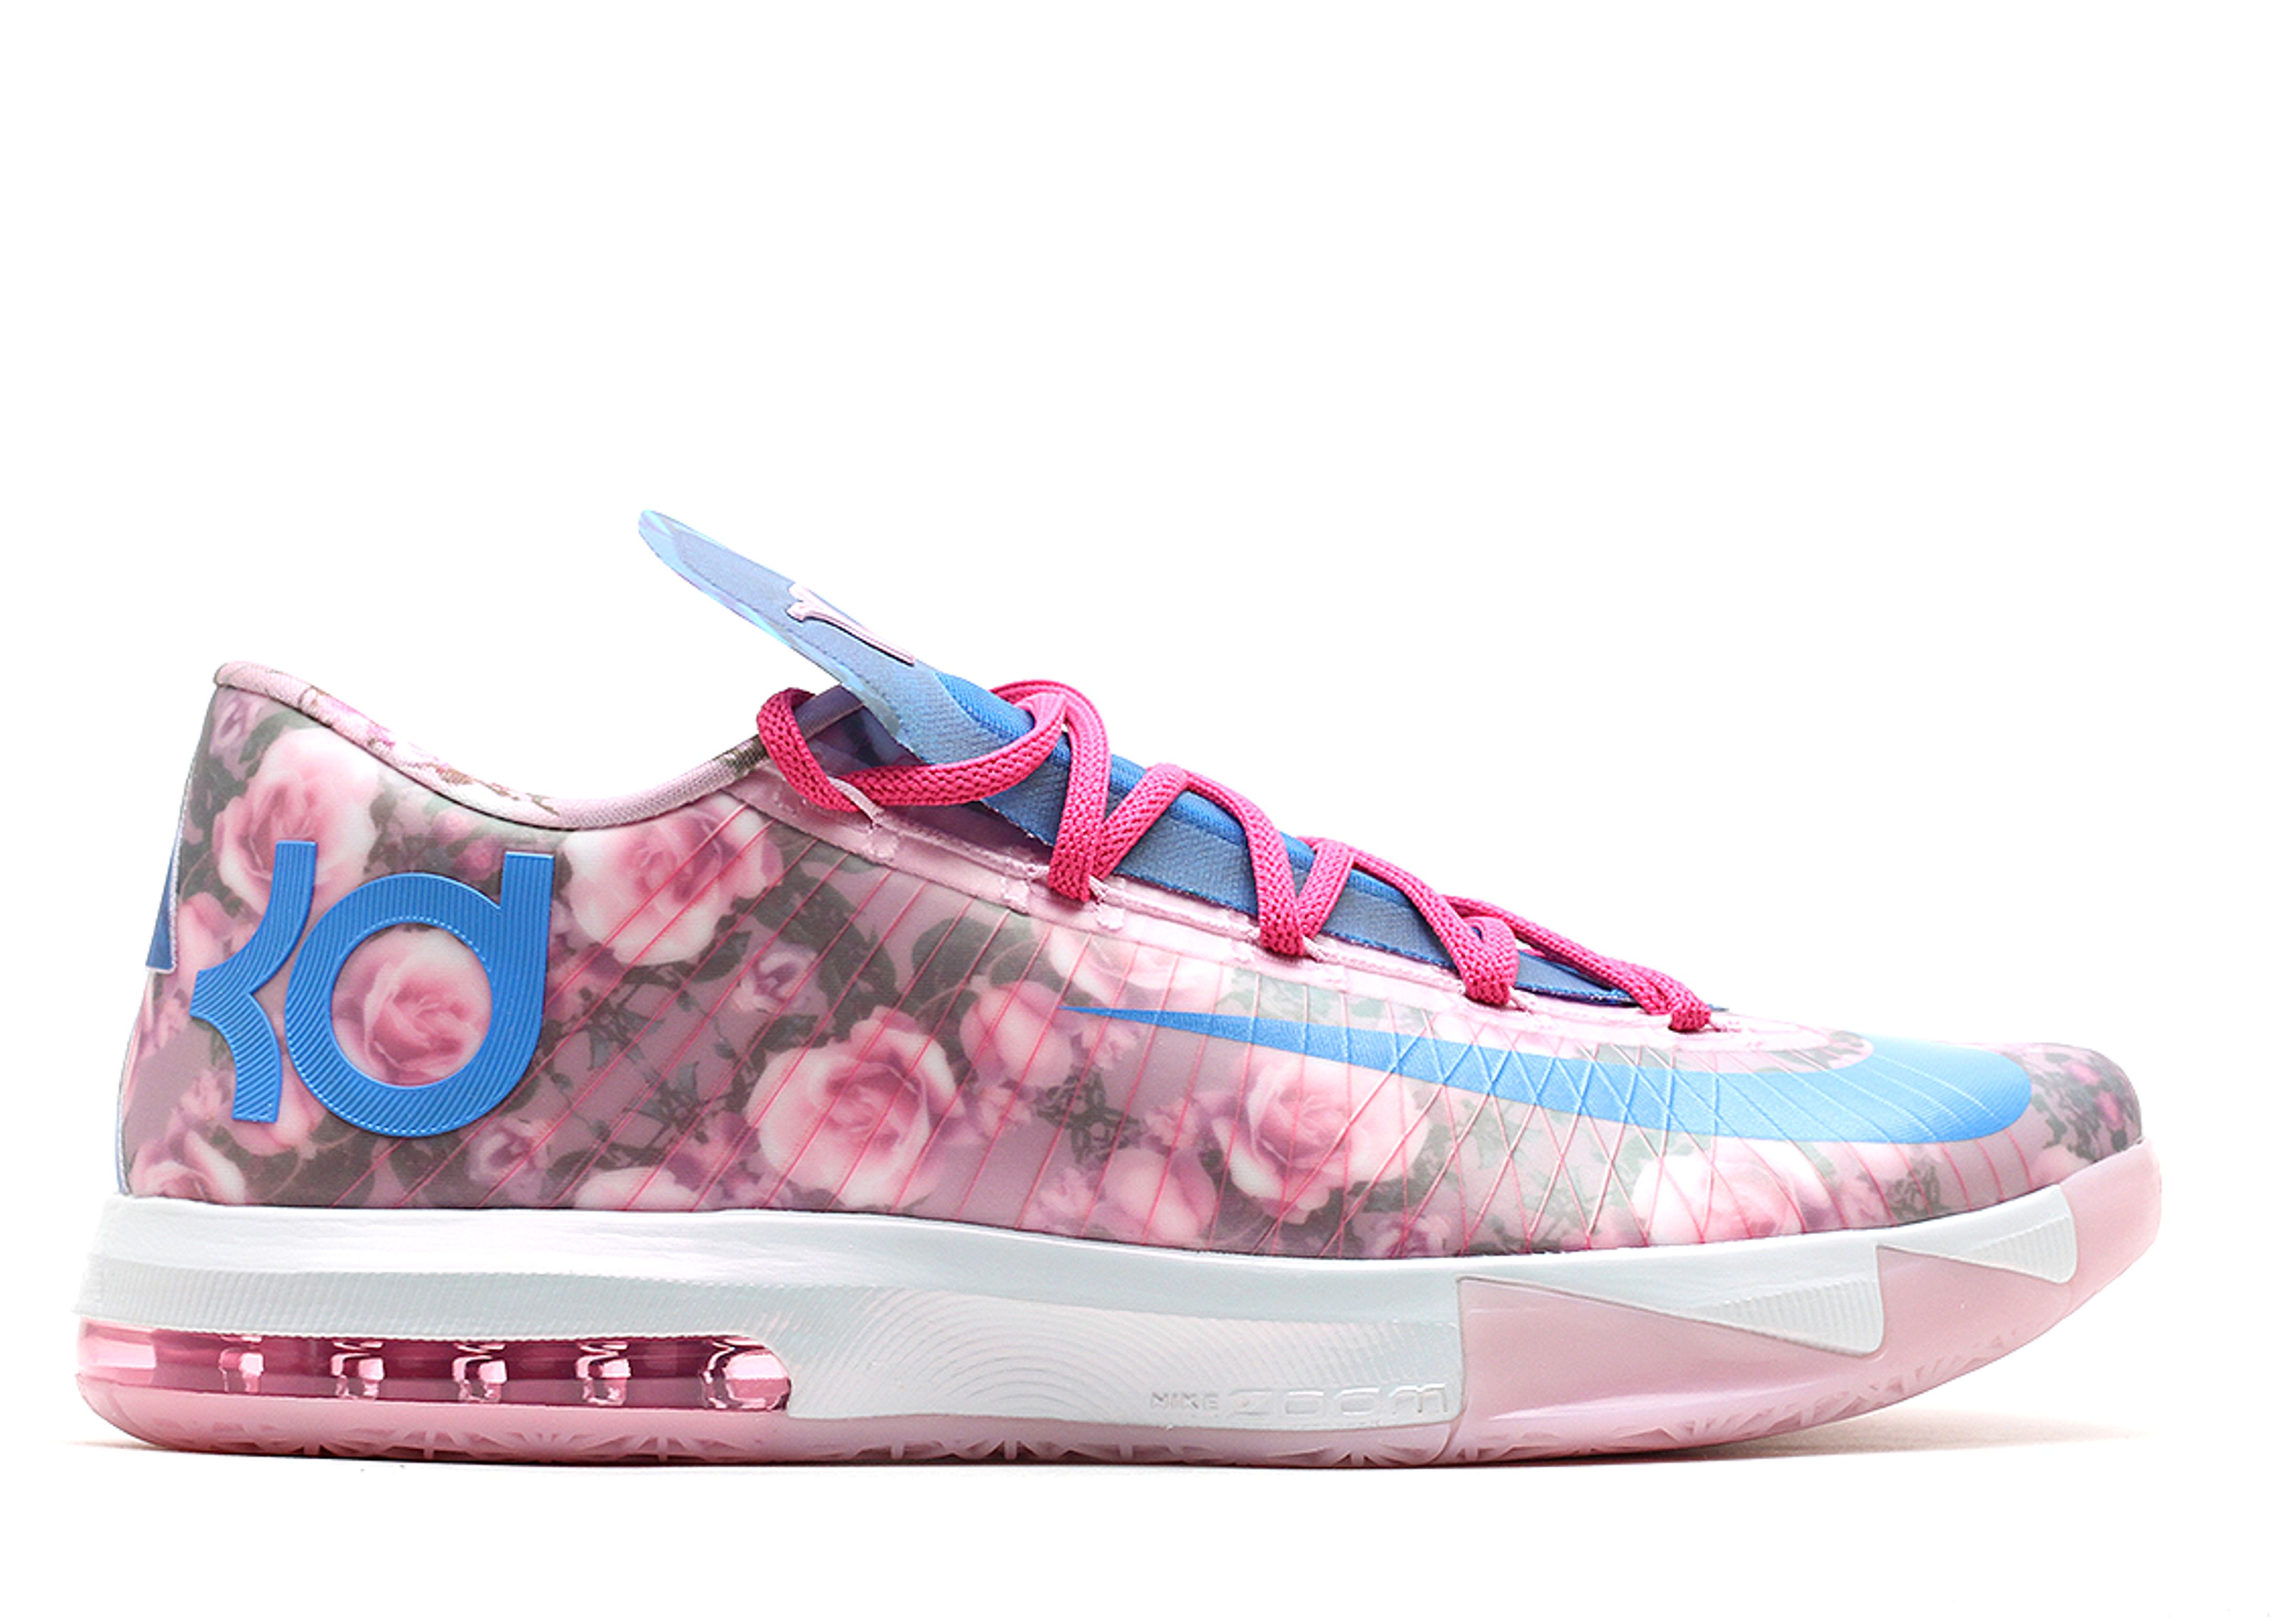 aunt pearls kd 6